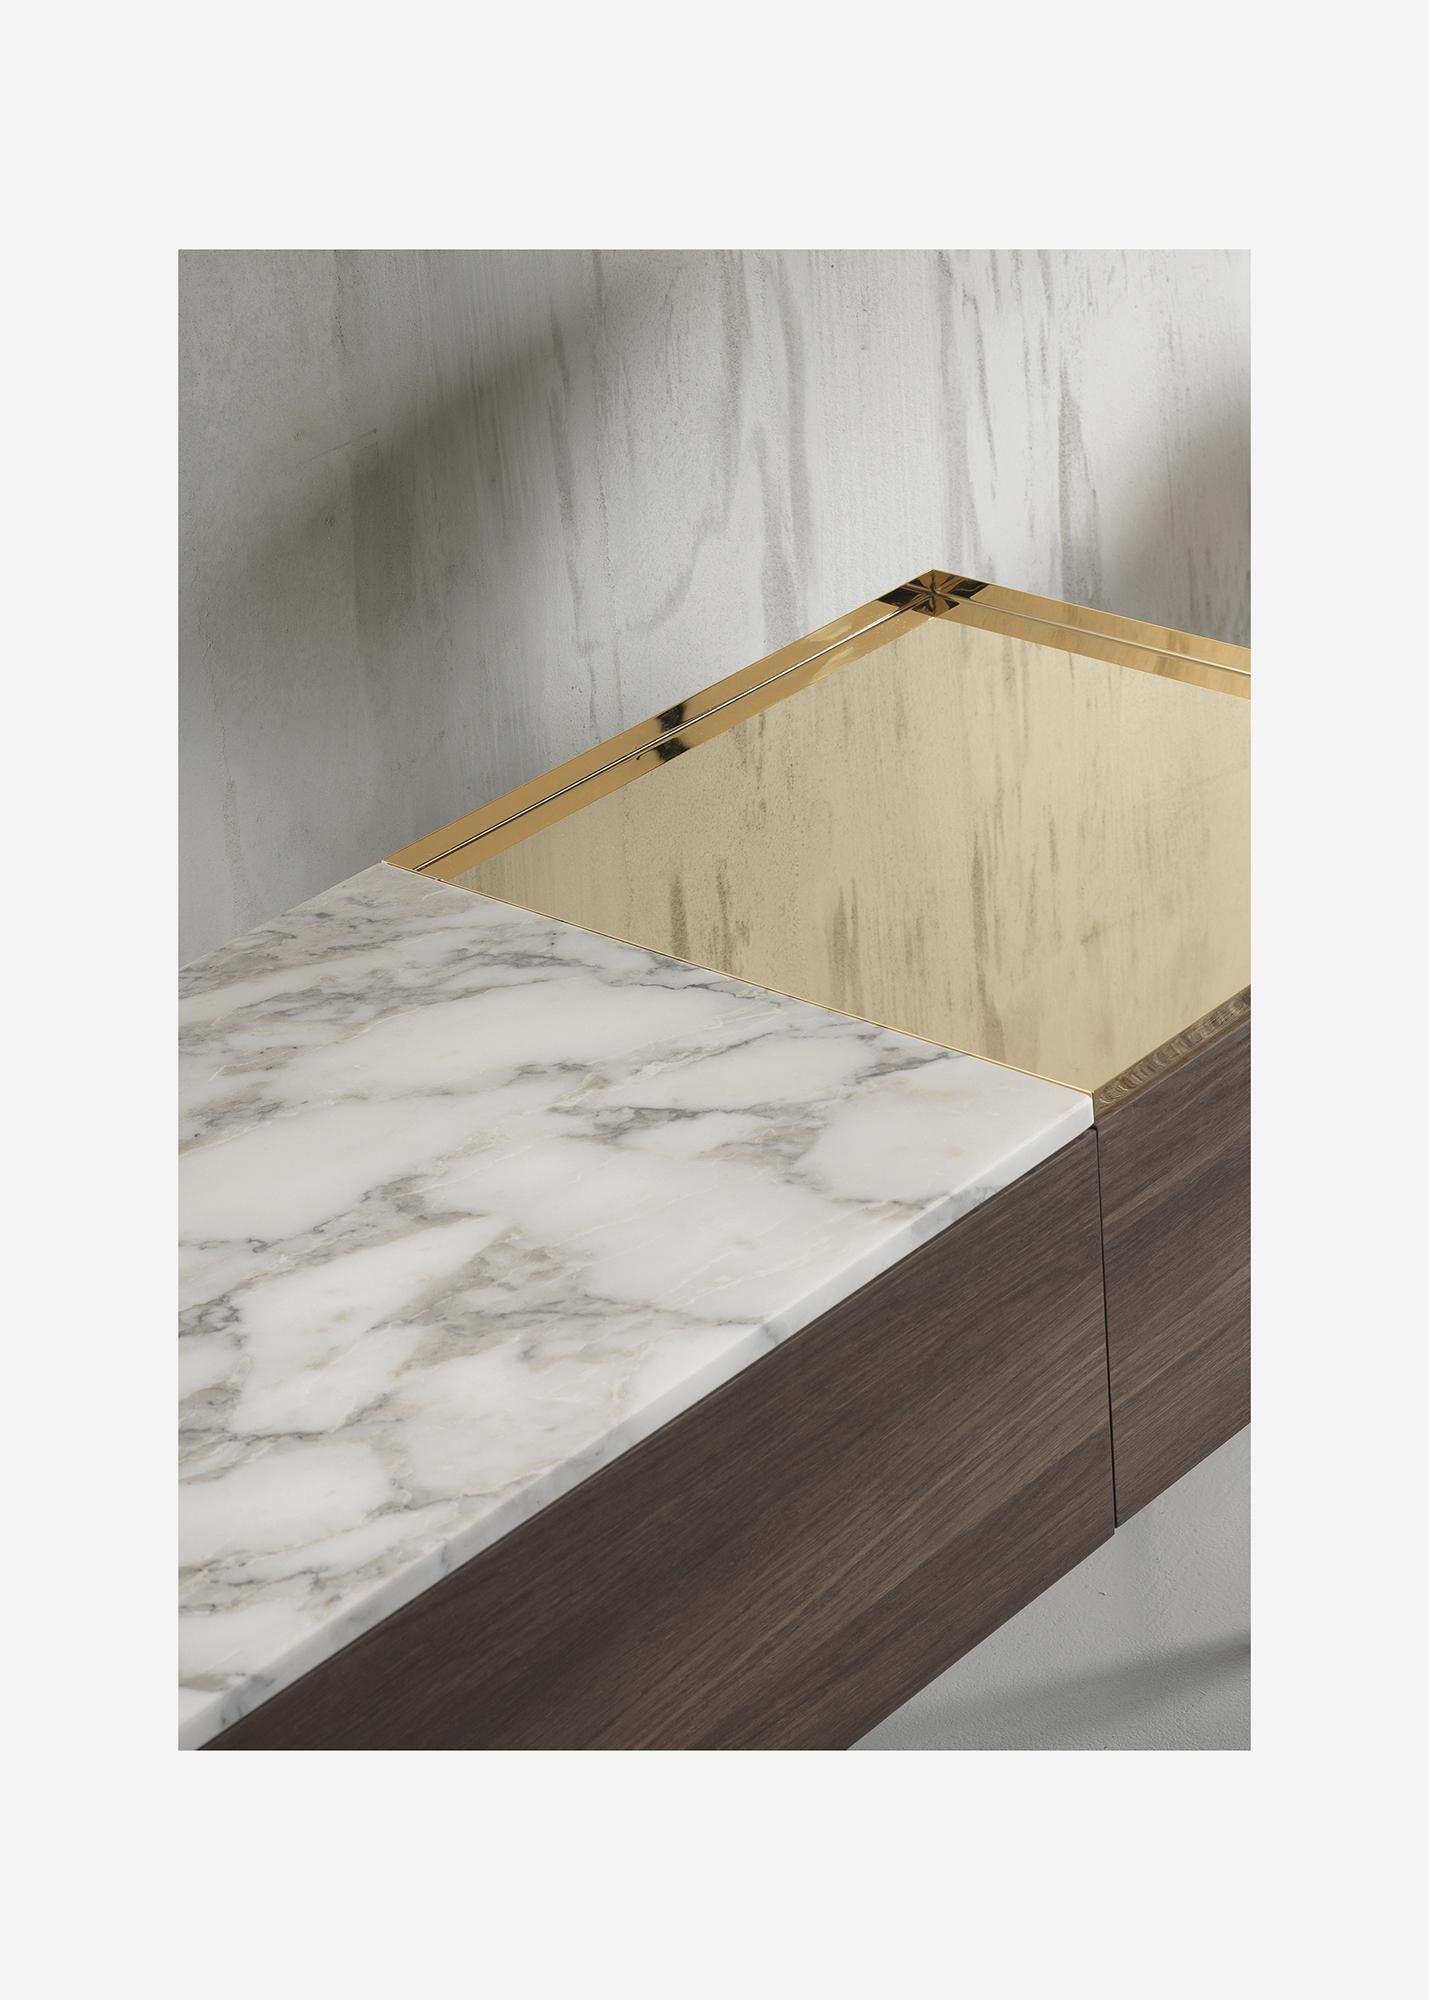 Acerbis Small Moodboard Sideboard in White/Grey Marble & Dark Stained Walnut Top In New Condition For Sale In Brooklyn, NY